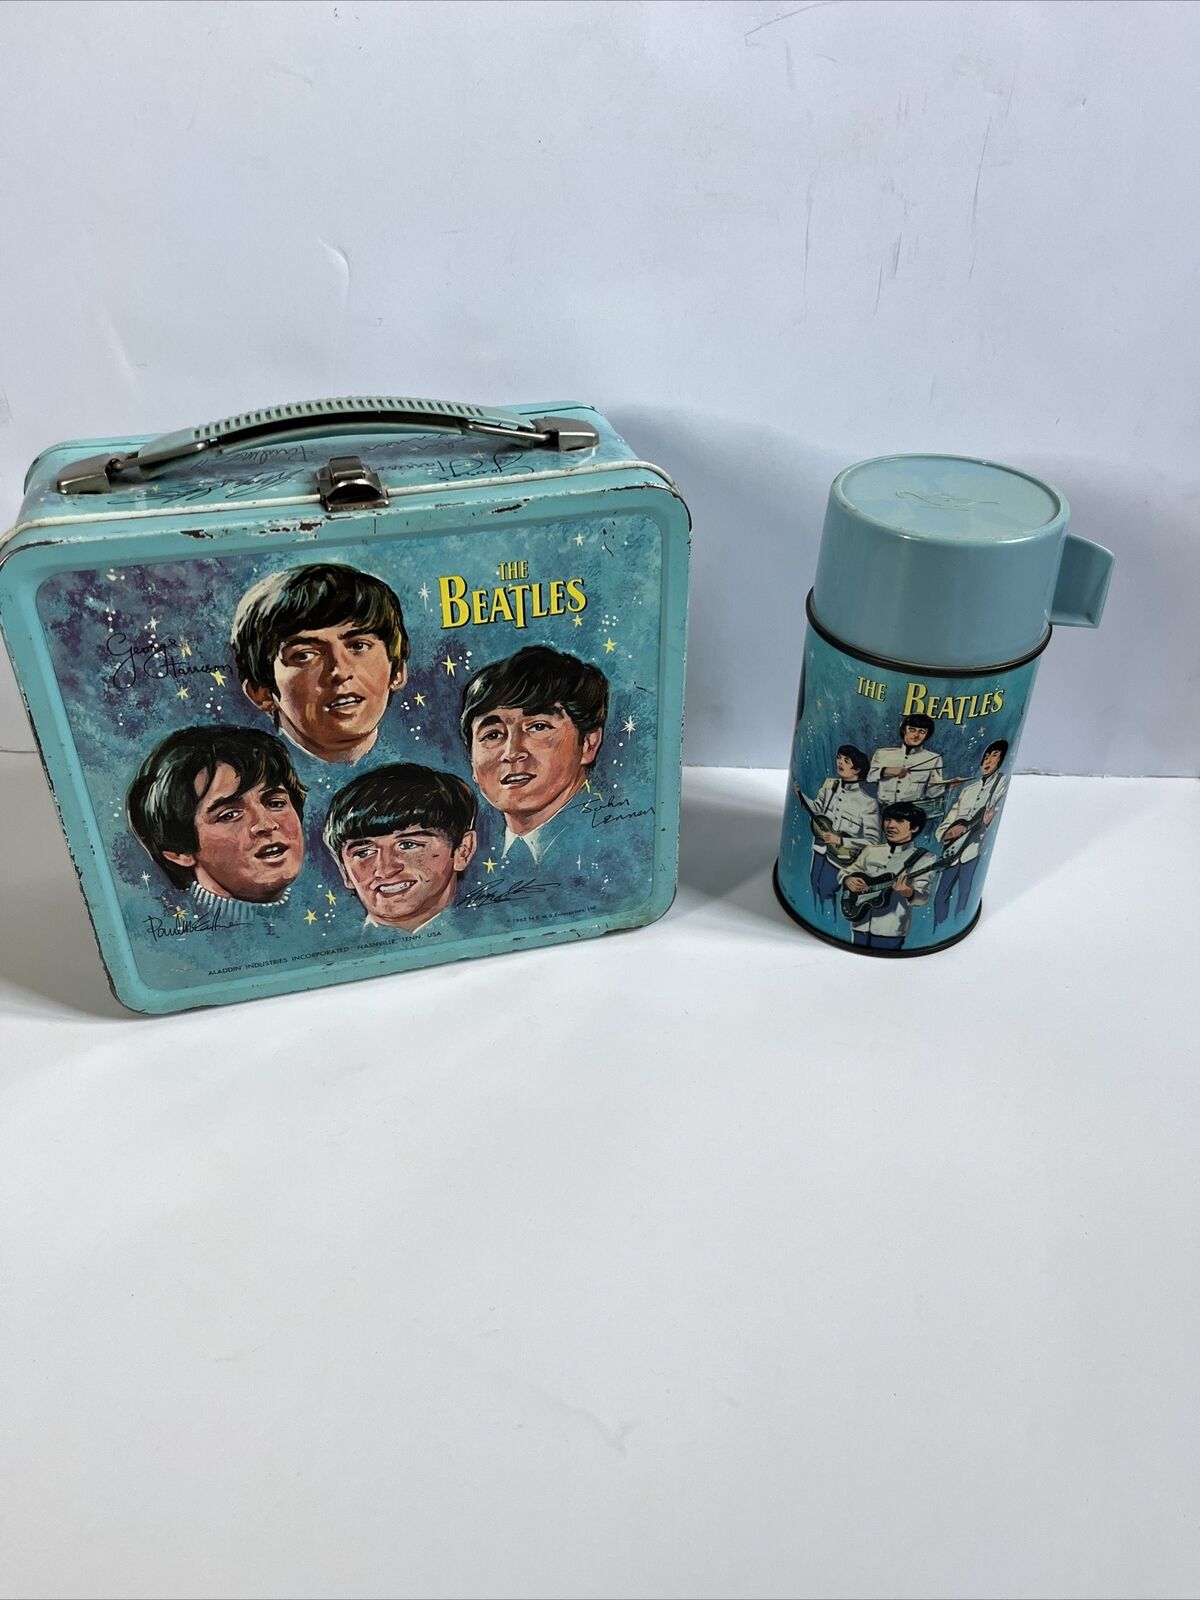 Vintage 1965 Beatles Lunch Box and Thermos  Lunchbox  Aladdin